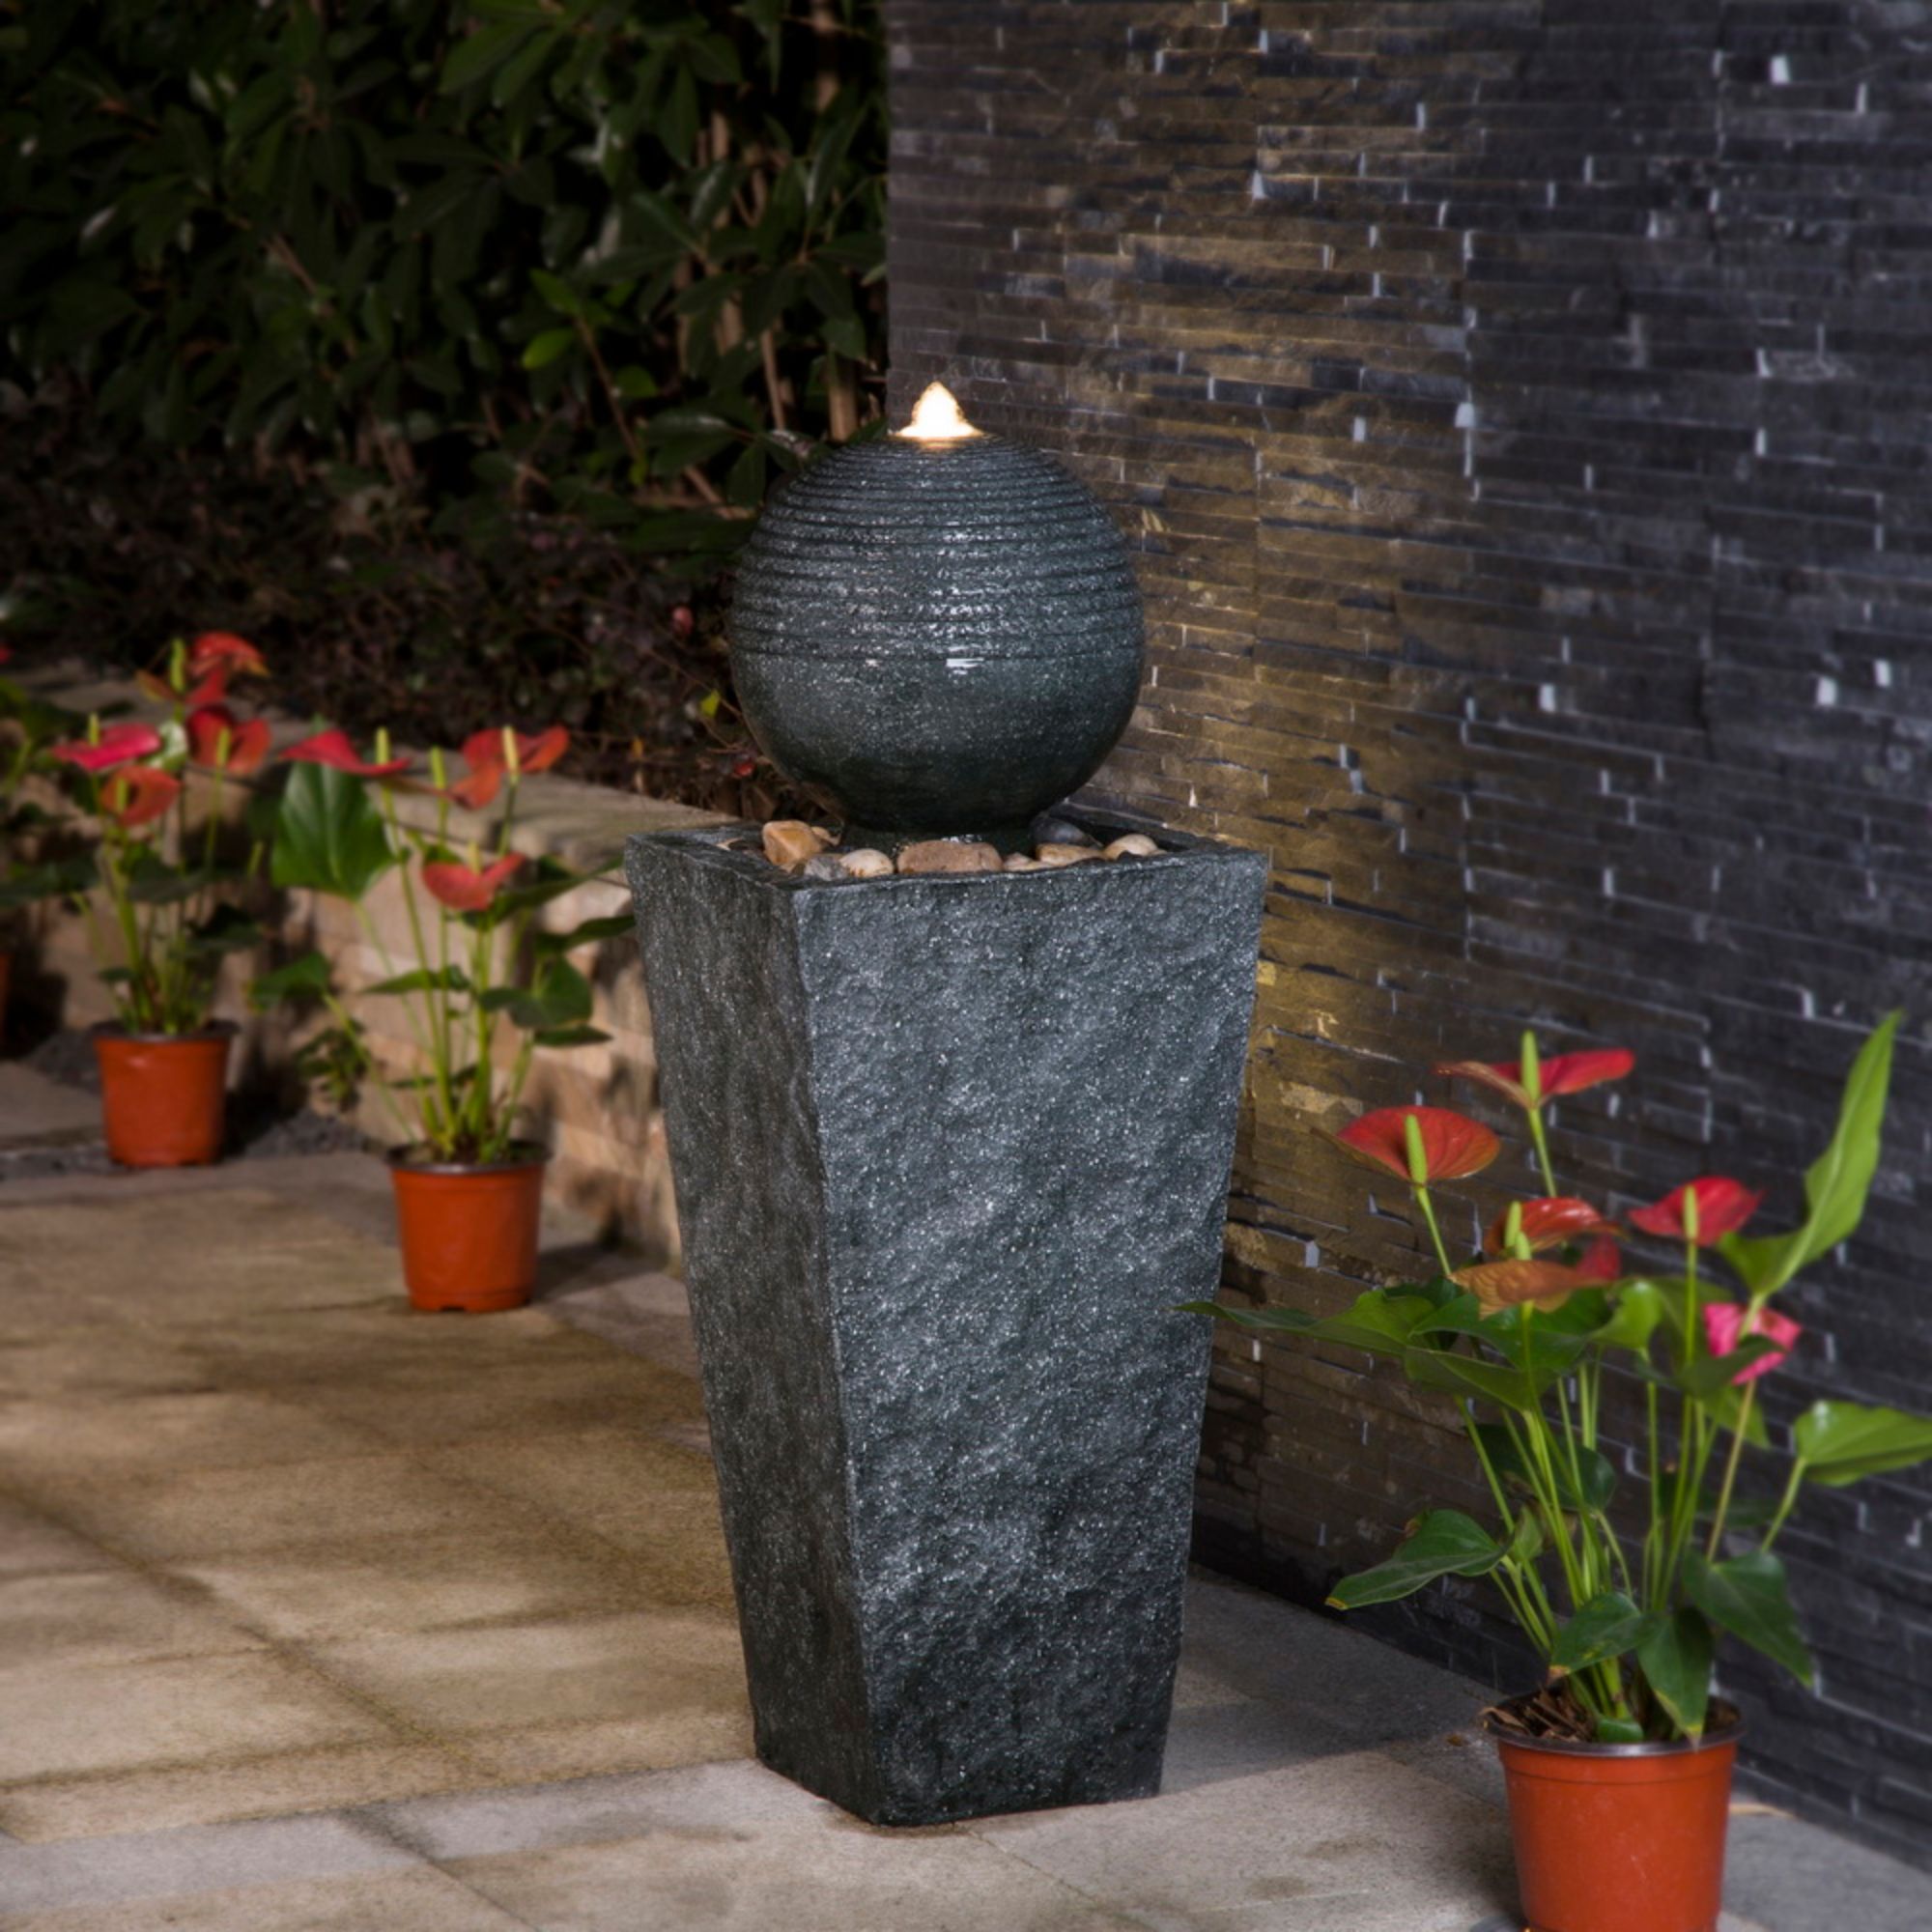 Glitzhome 31.5" Gray and White Rippling Floating Sphere Outdoor Garden Pedestal Fountain with LED Light